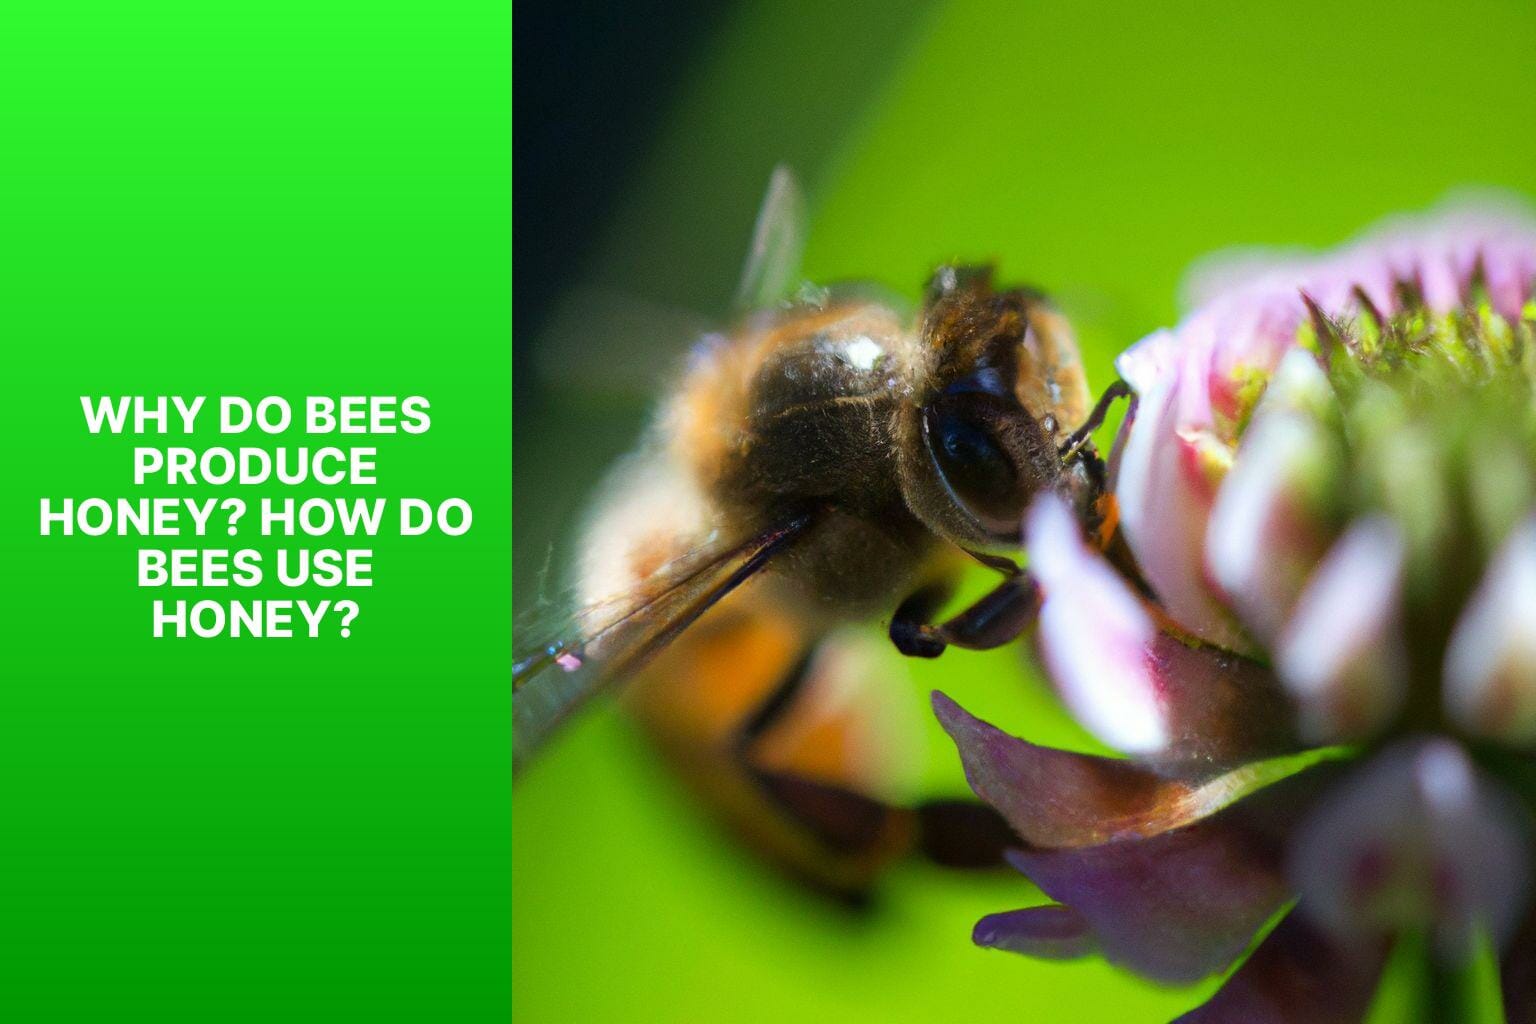 Why Do Bees Produce Honey? How Do Bees Use Honey? - what do bees use honey for 